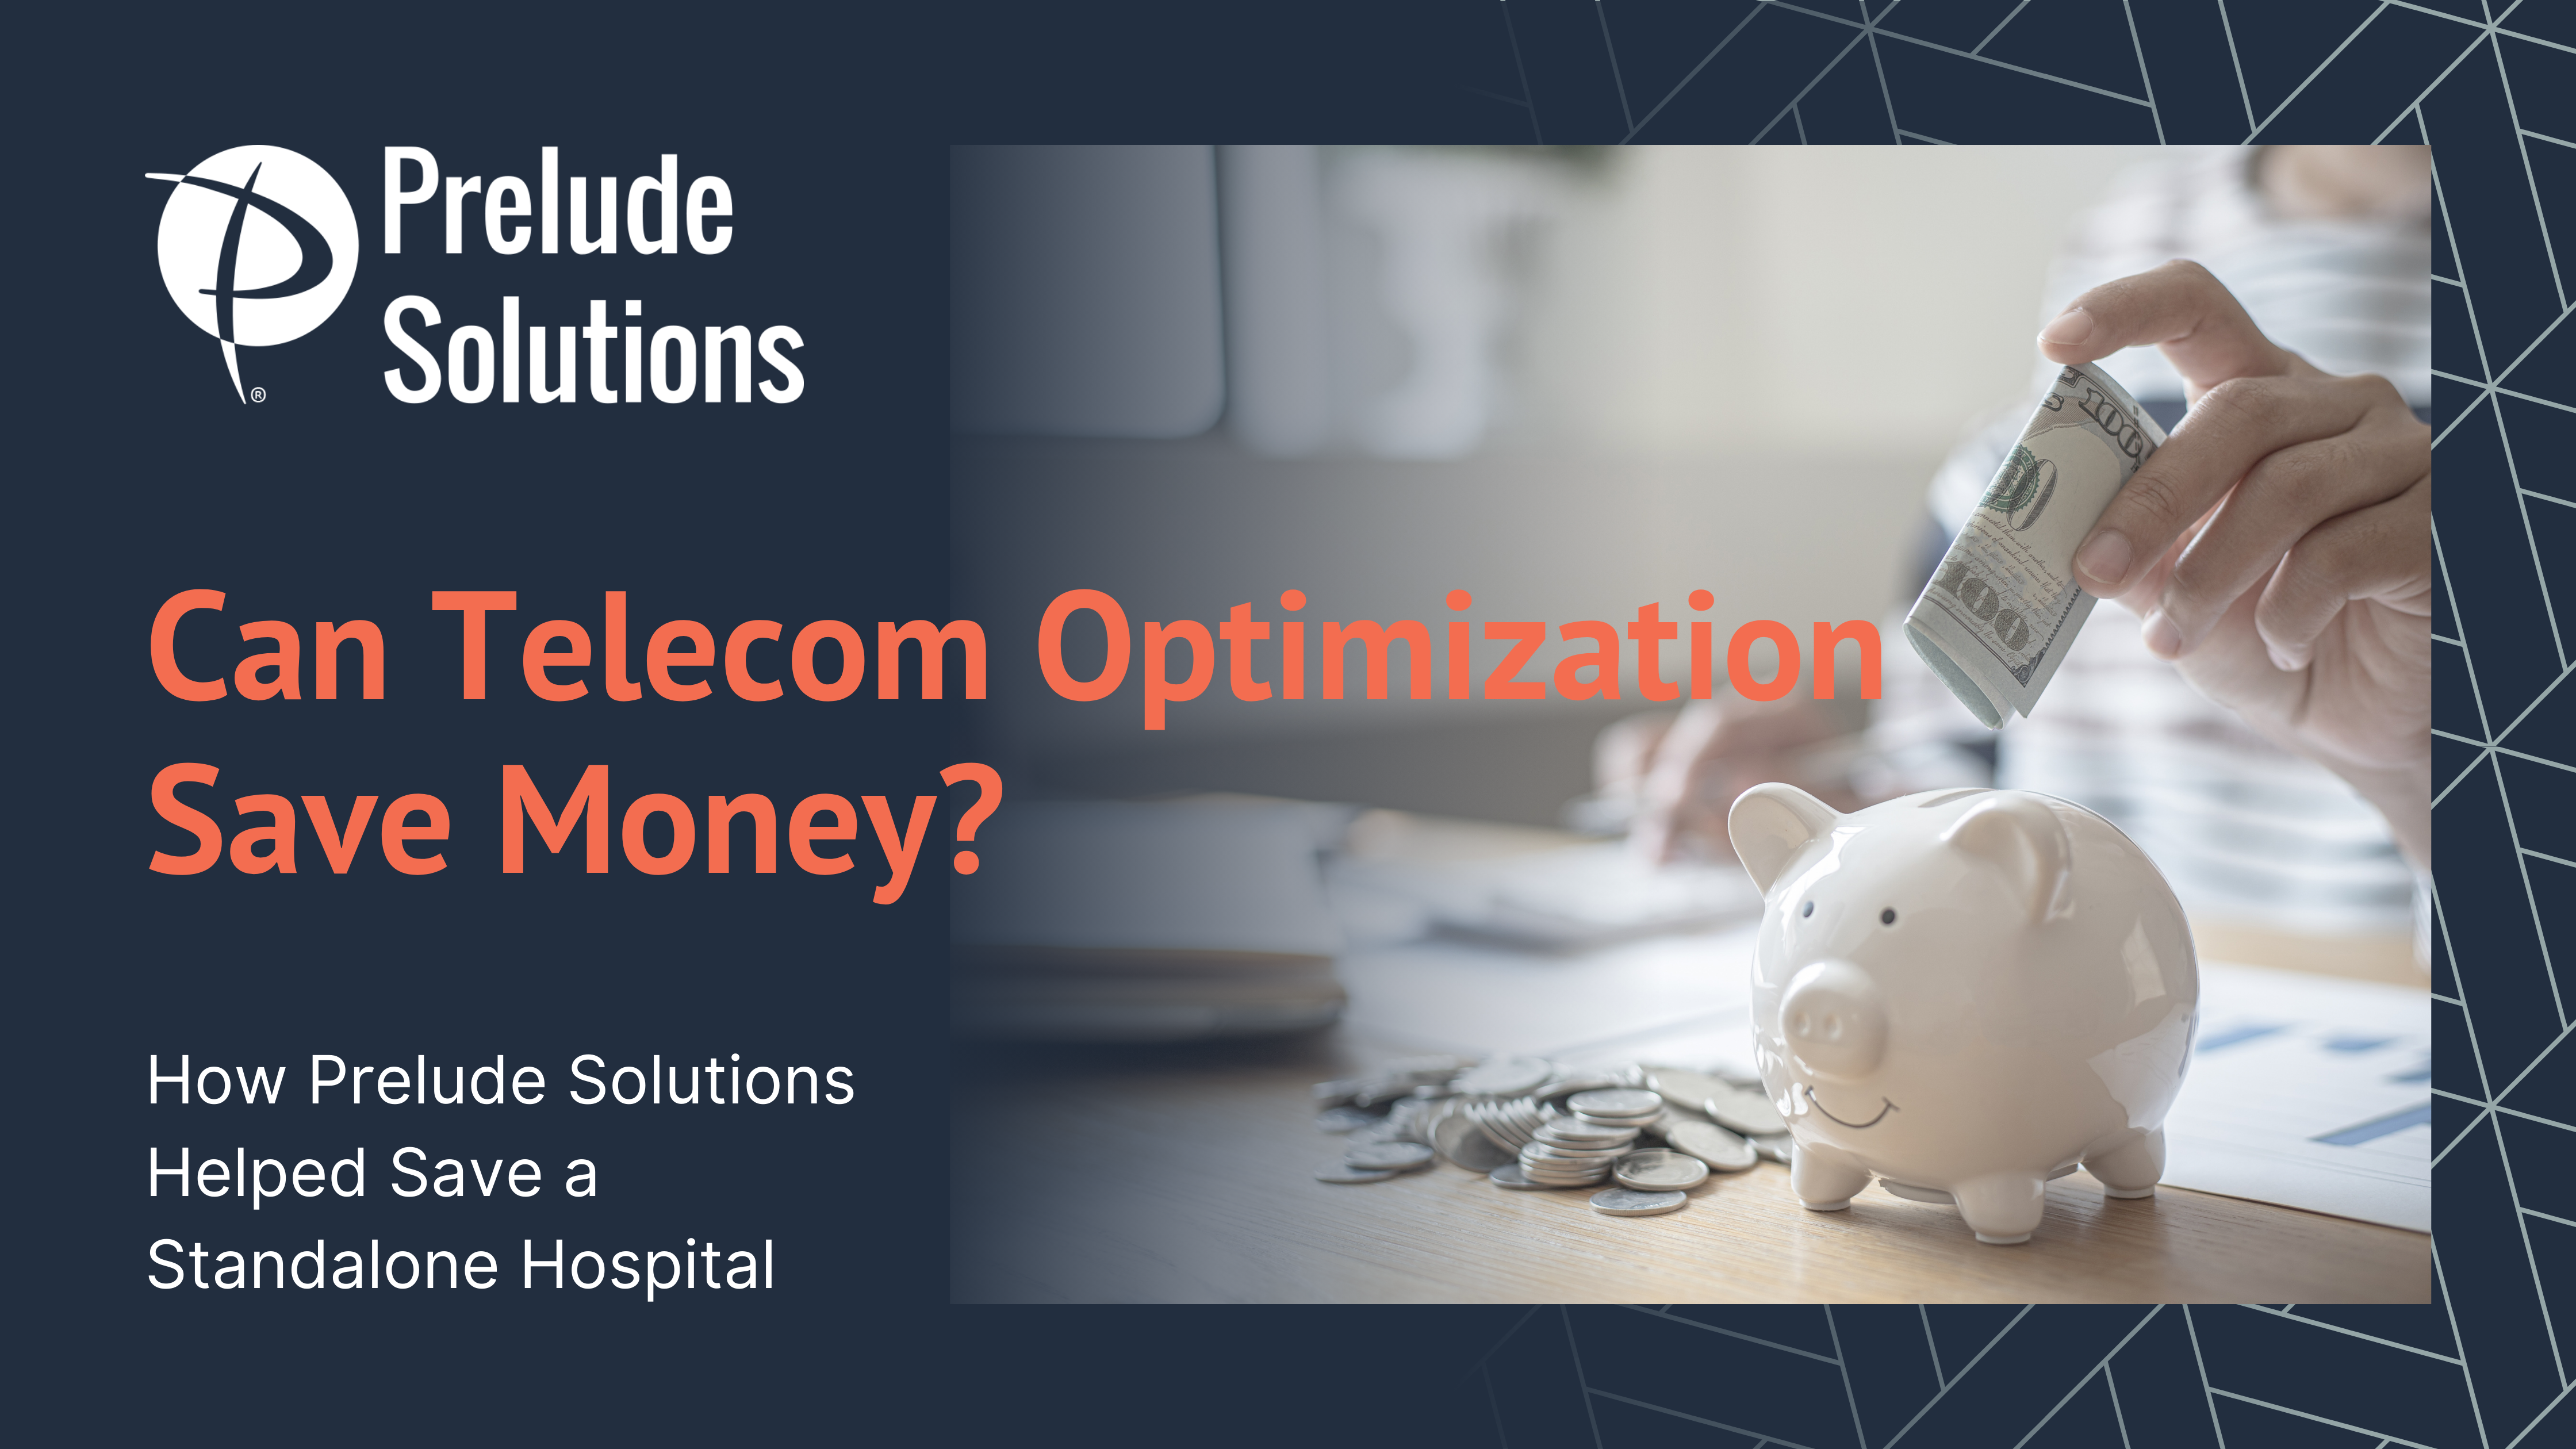 Blog graphic: Can Telecom Optimization Save Money? How Prelude Solutions Helped Save a Standalone Hospital.